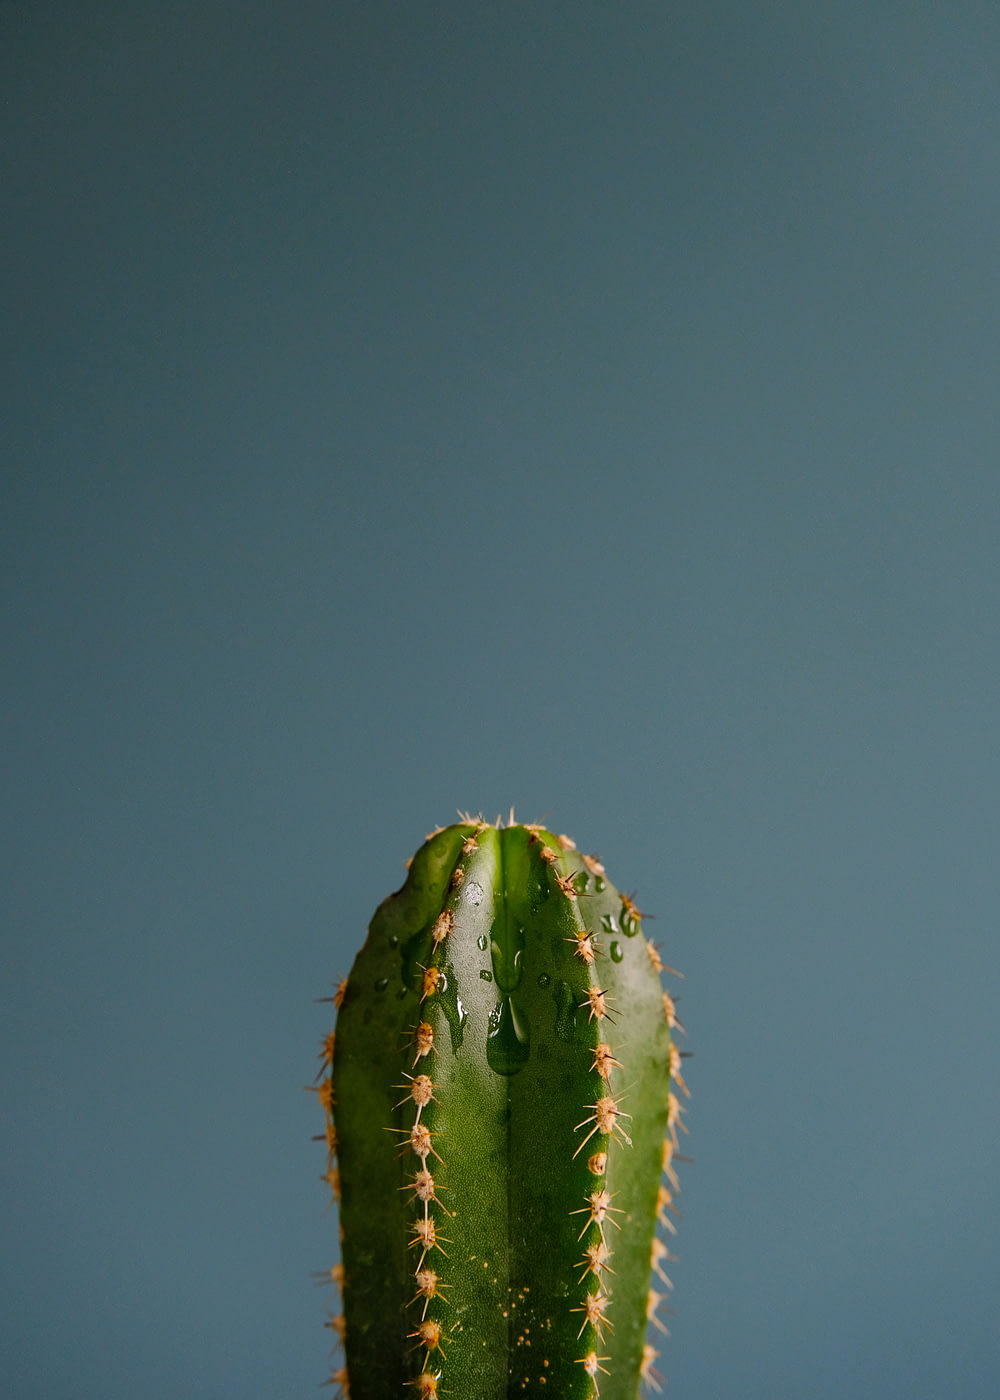 green cactus plant in close up photography